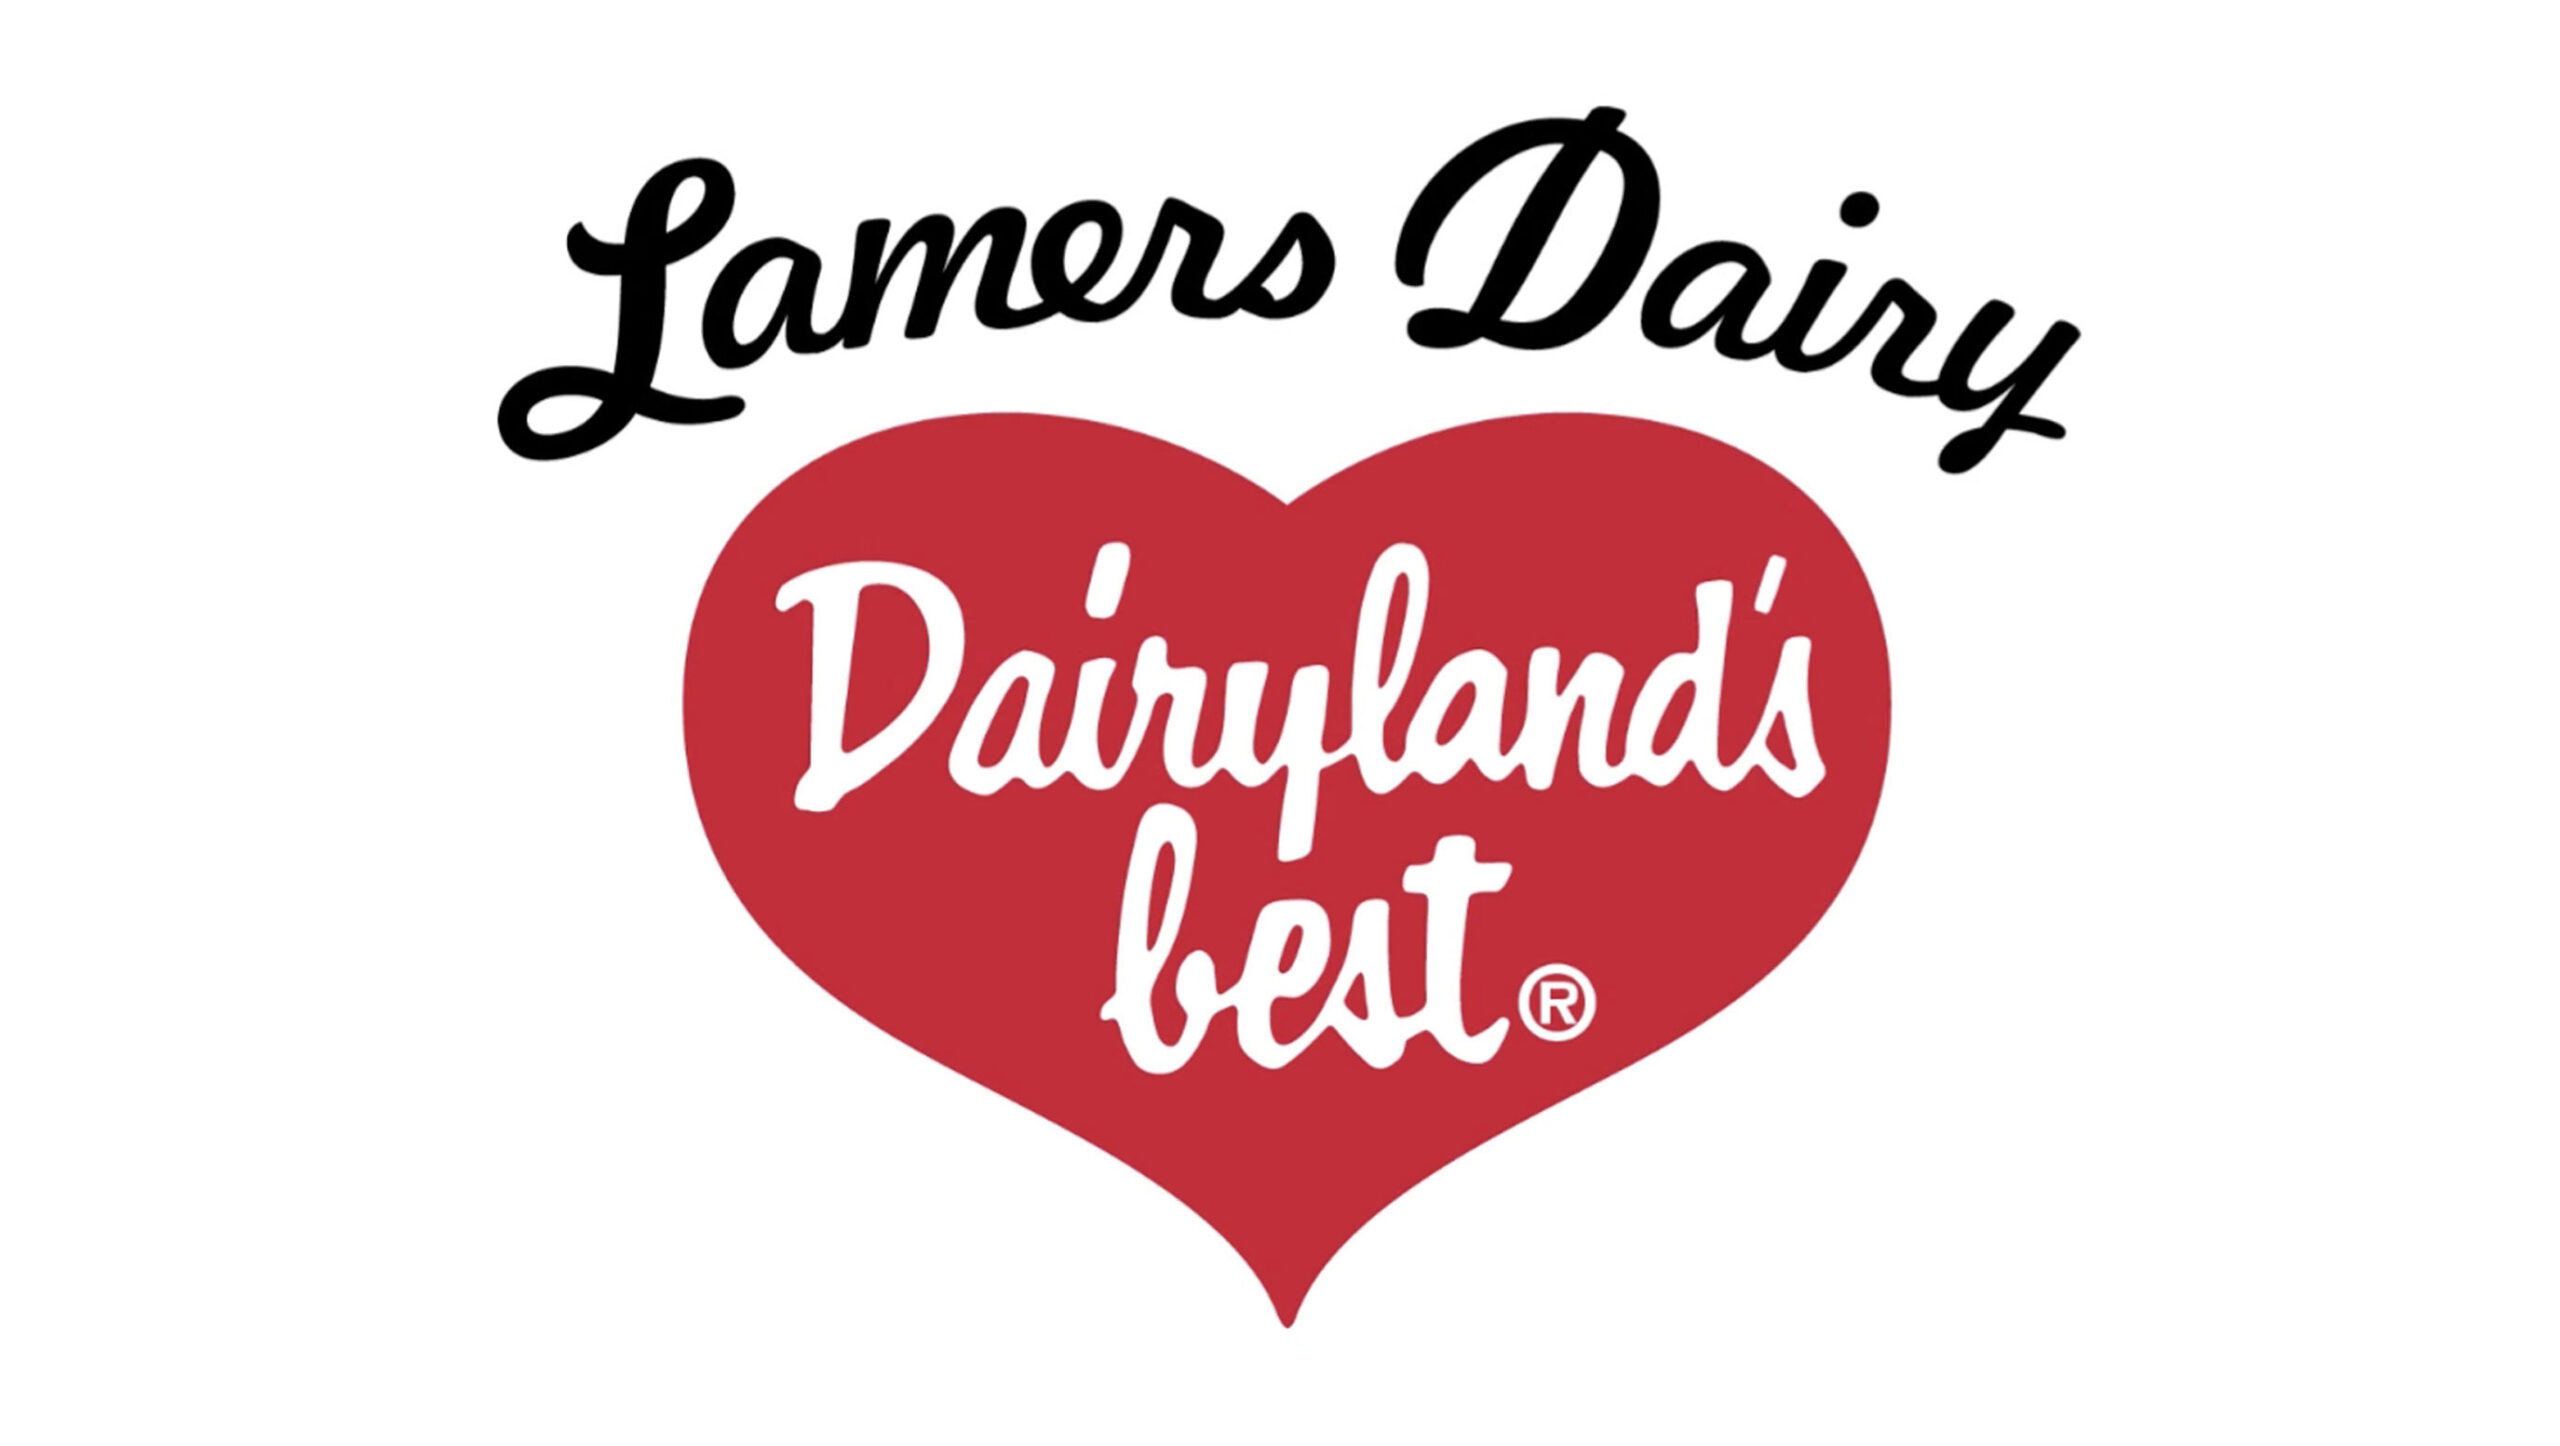 dairlylands best logo, lamers dairy inc, dairylands best, appleton, wisconsin, family farms, fresh milk, dairy products, ecommerce store, taste the difference, store locator, fox valley web design, graphic design, custom wordpress websites, custom ecommerce websites, logo design, drone aerial photography, above wisconsin, final cut pro, video production, packerland, fox valley wi